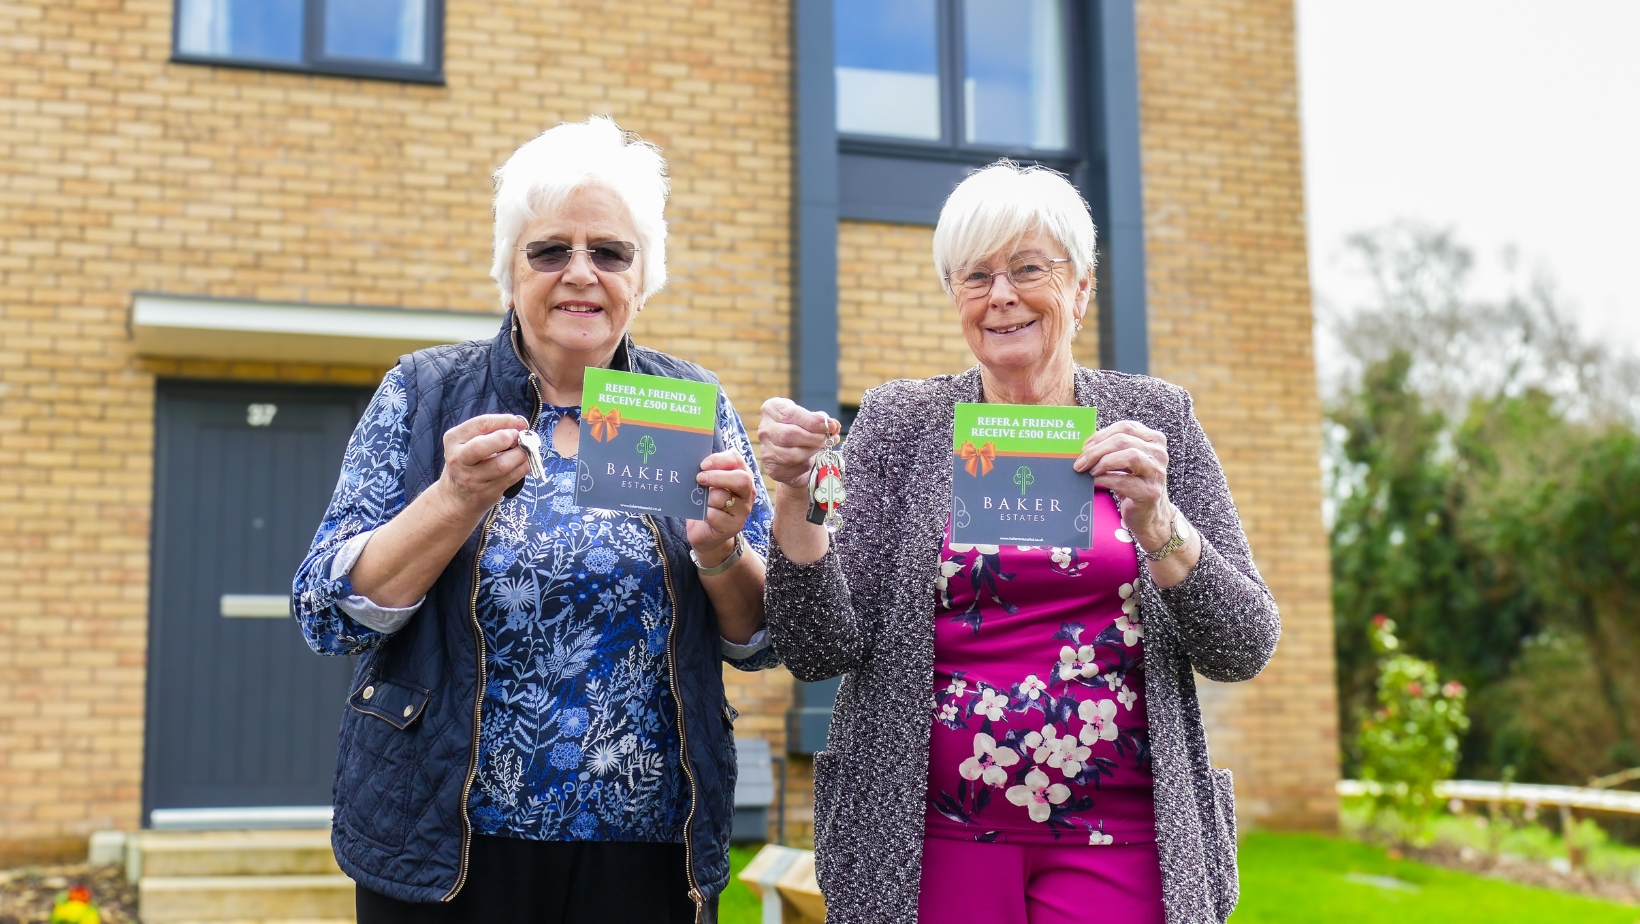 Refer a Friend scheme led Valerie to buy at Meadowbrook in Callington